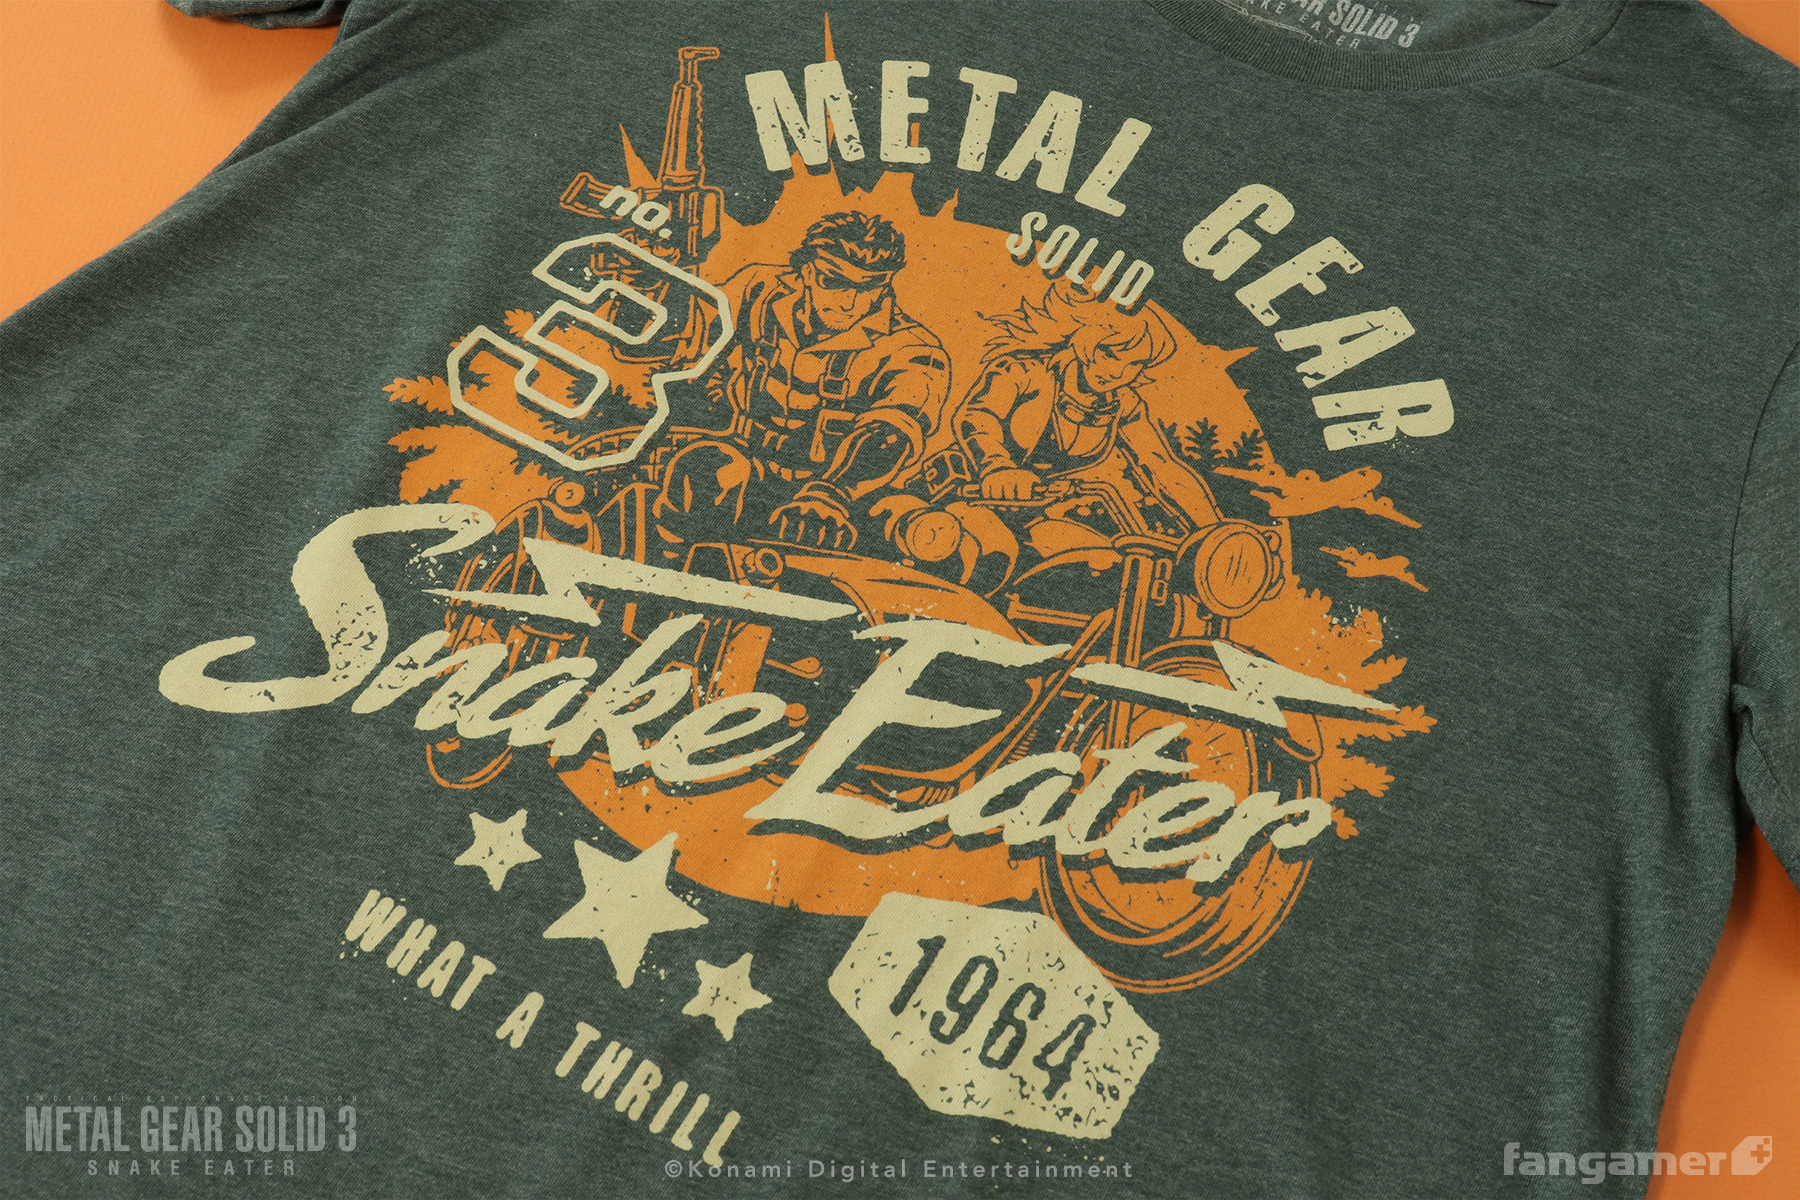 Metal Gear Solid」－ What a Thrill Tシャツ - Fangamer Japan